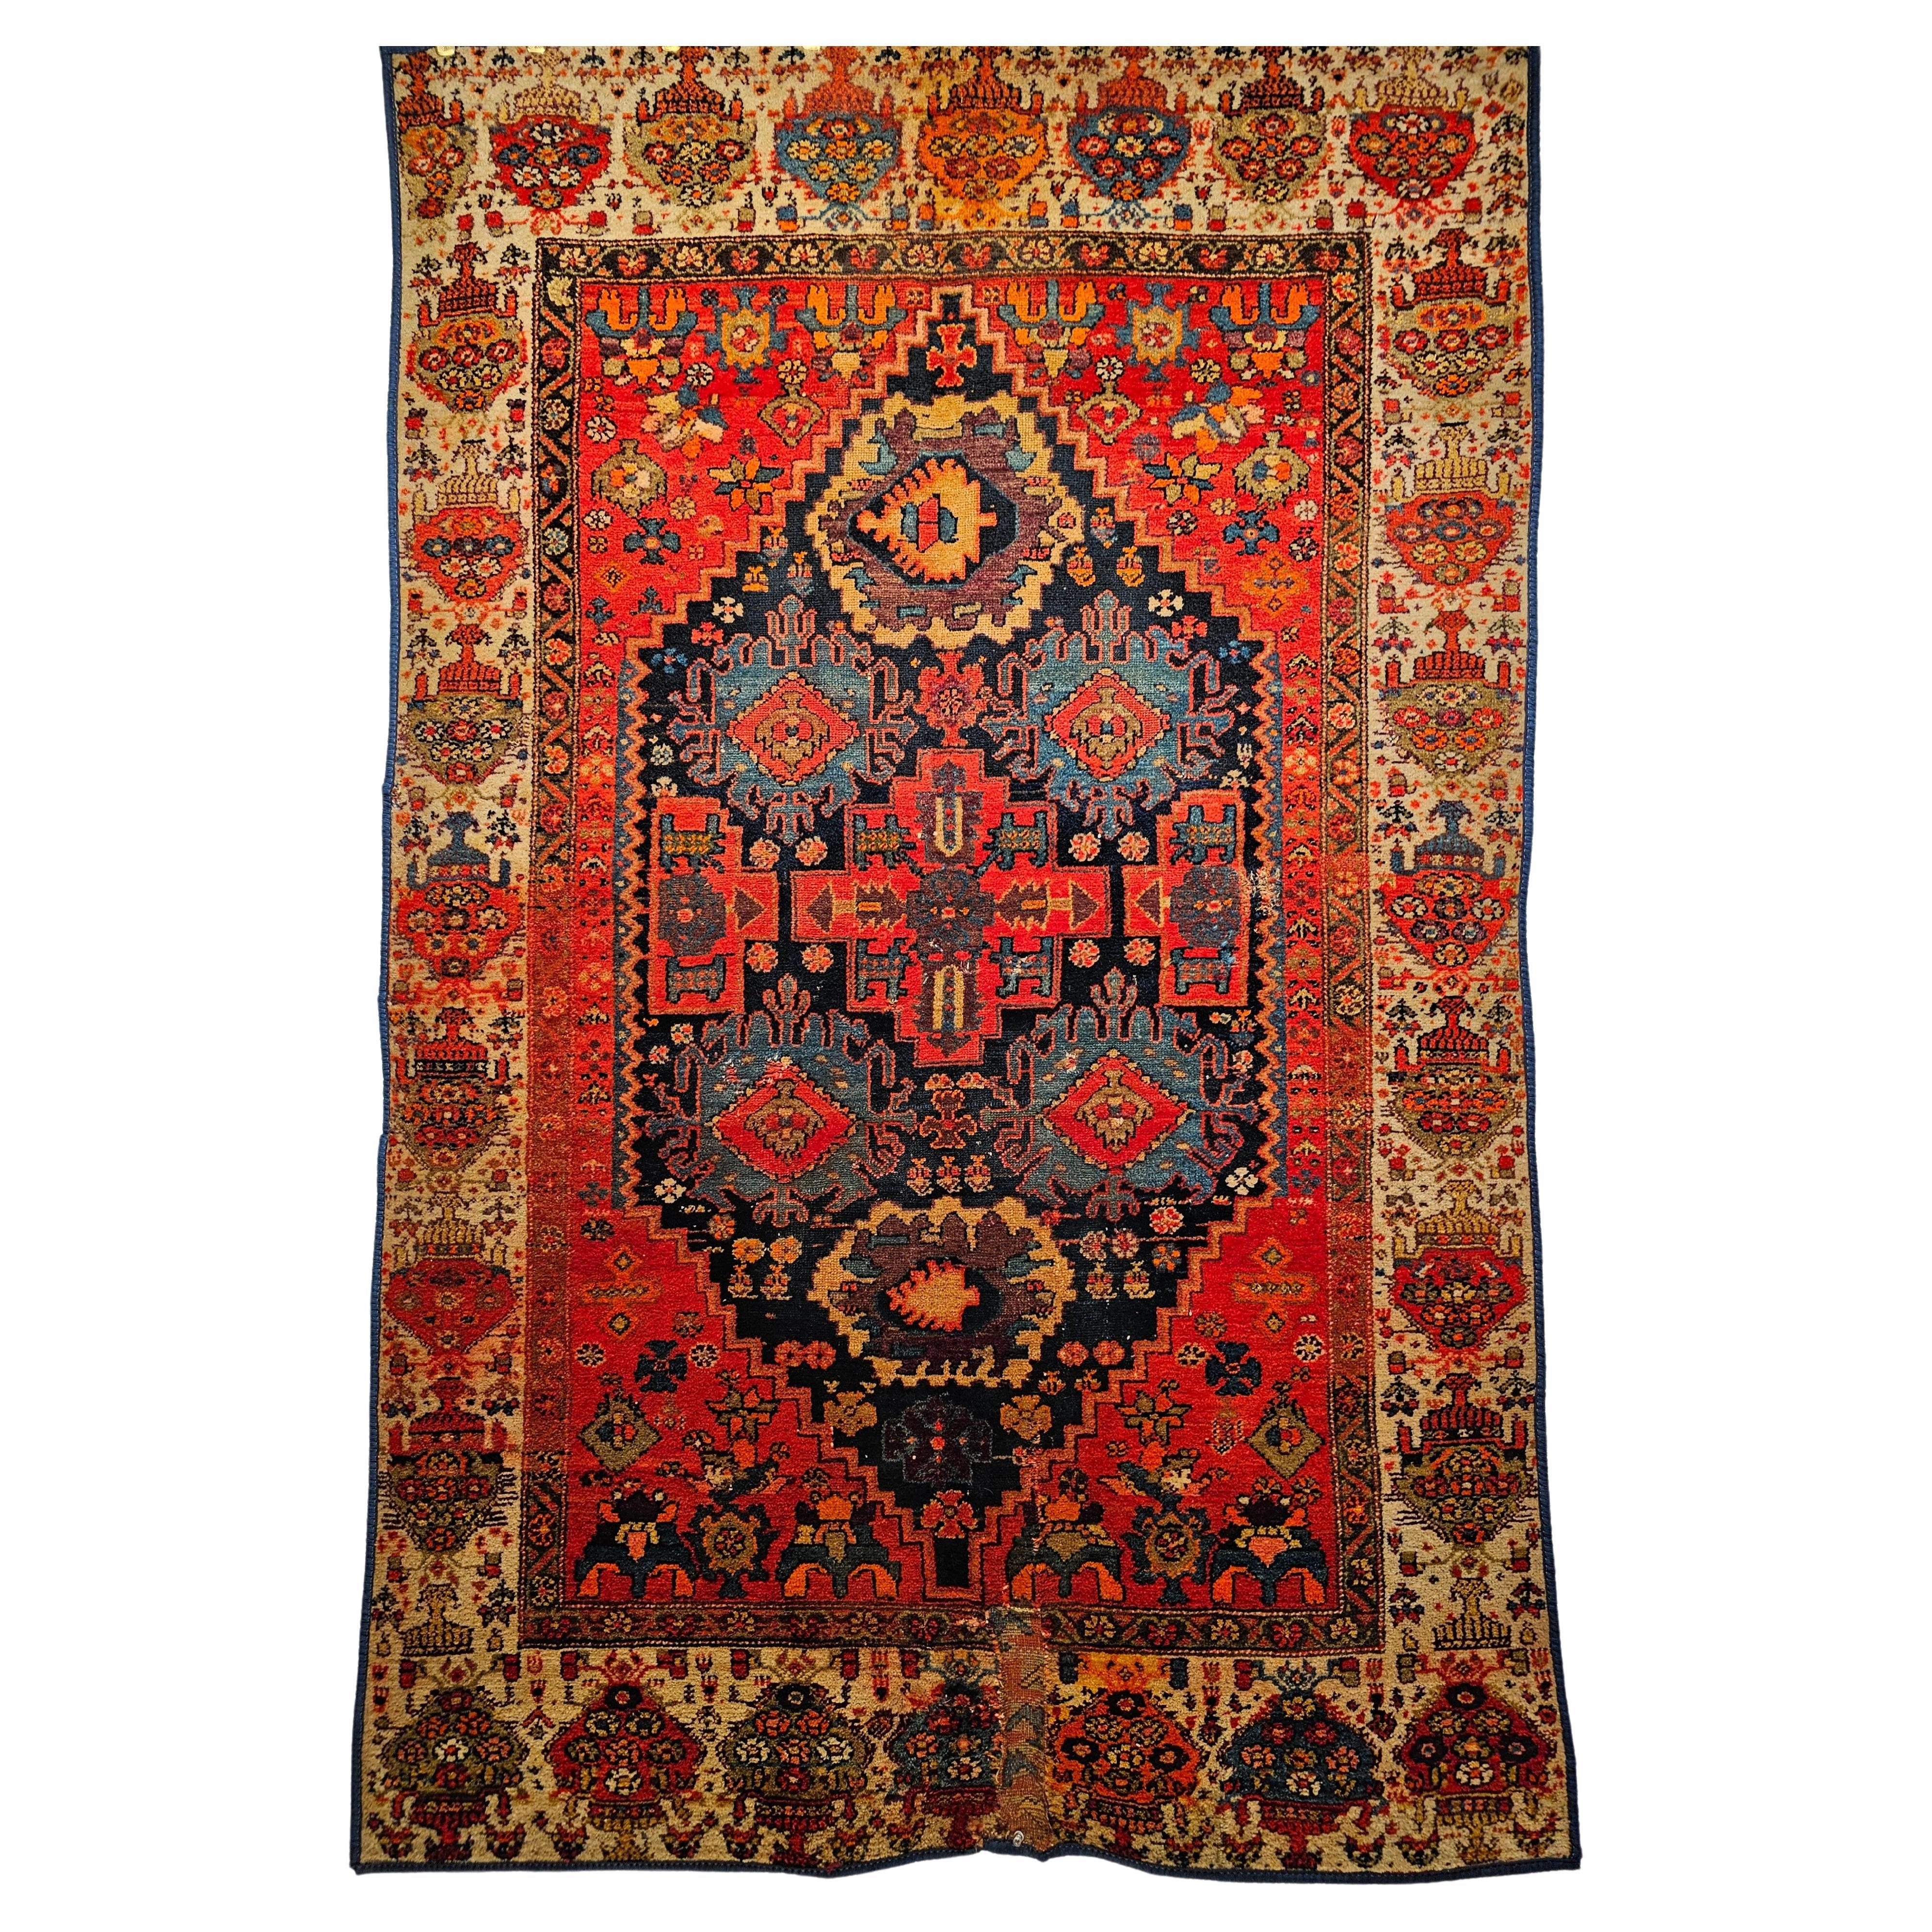 Vintage Persian Malayer Area Rug in Allover Geometric Design in Red, Blue, Ivory from the early 1900s.  The Persian Malayer has an extremely desirable and sought after “allover geometric” design.  In addition, the color scheme for the geometric